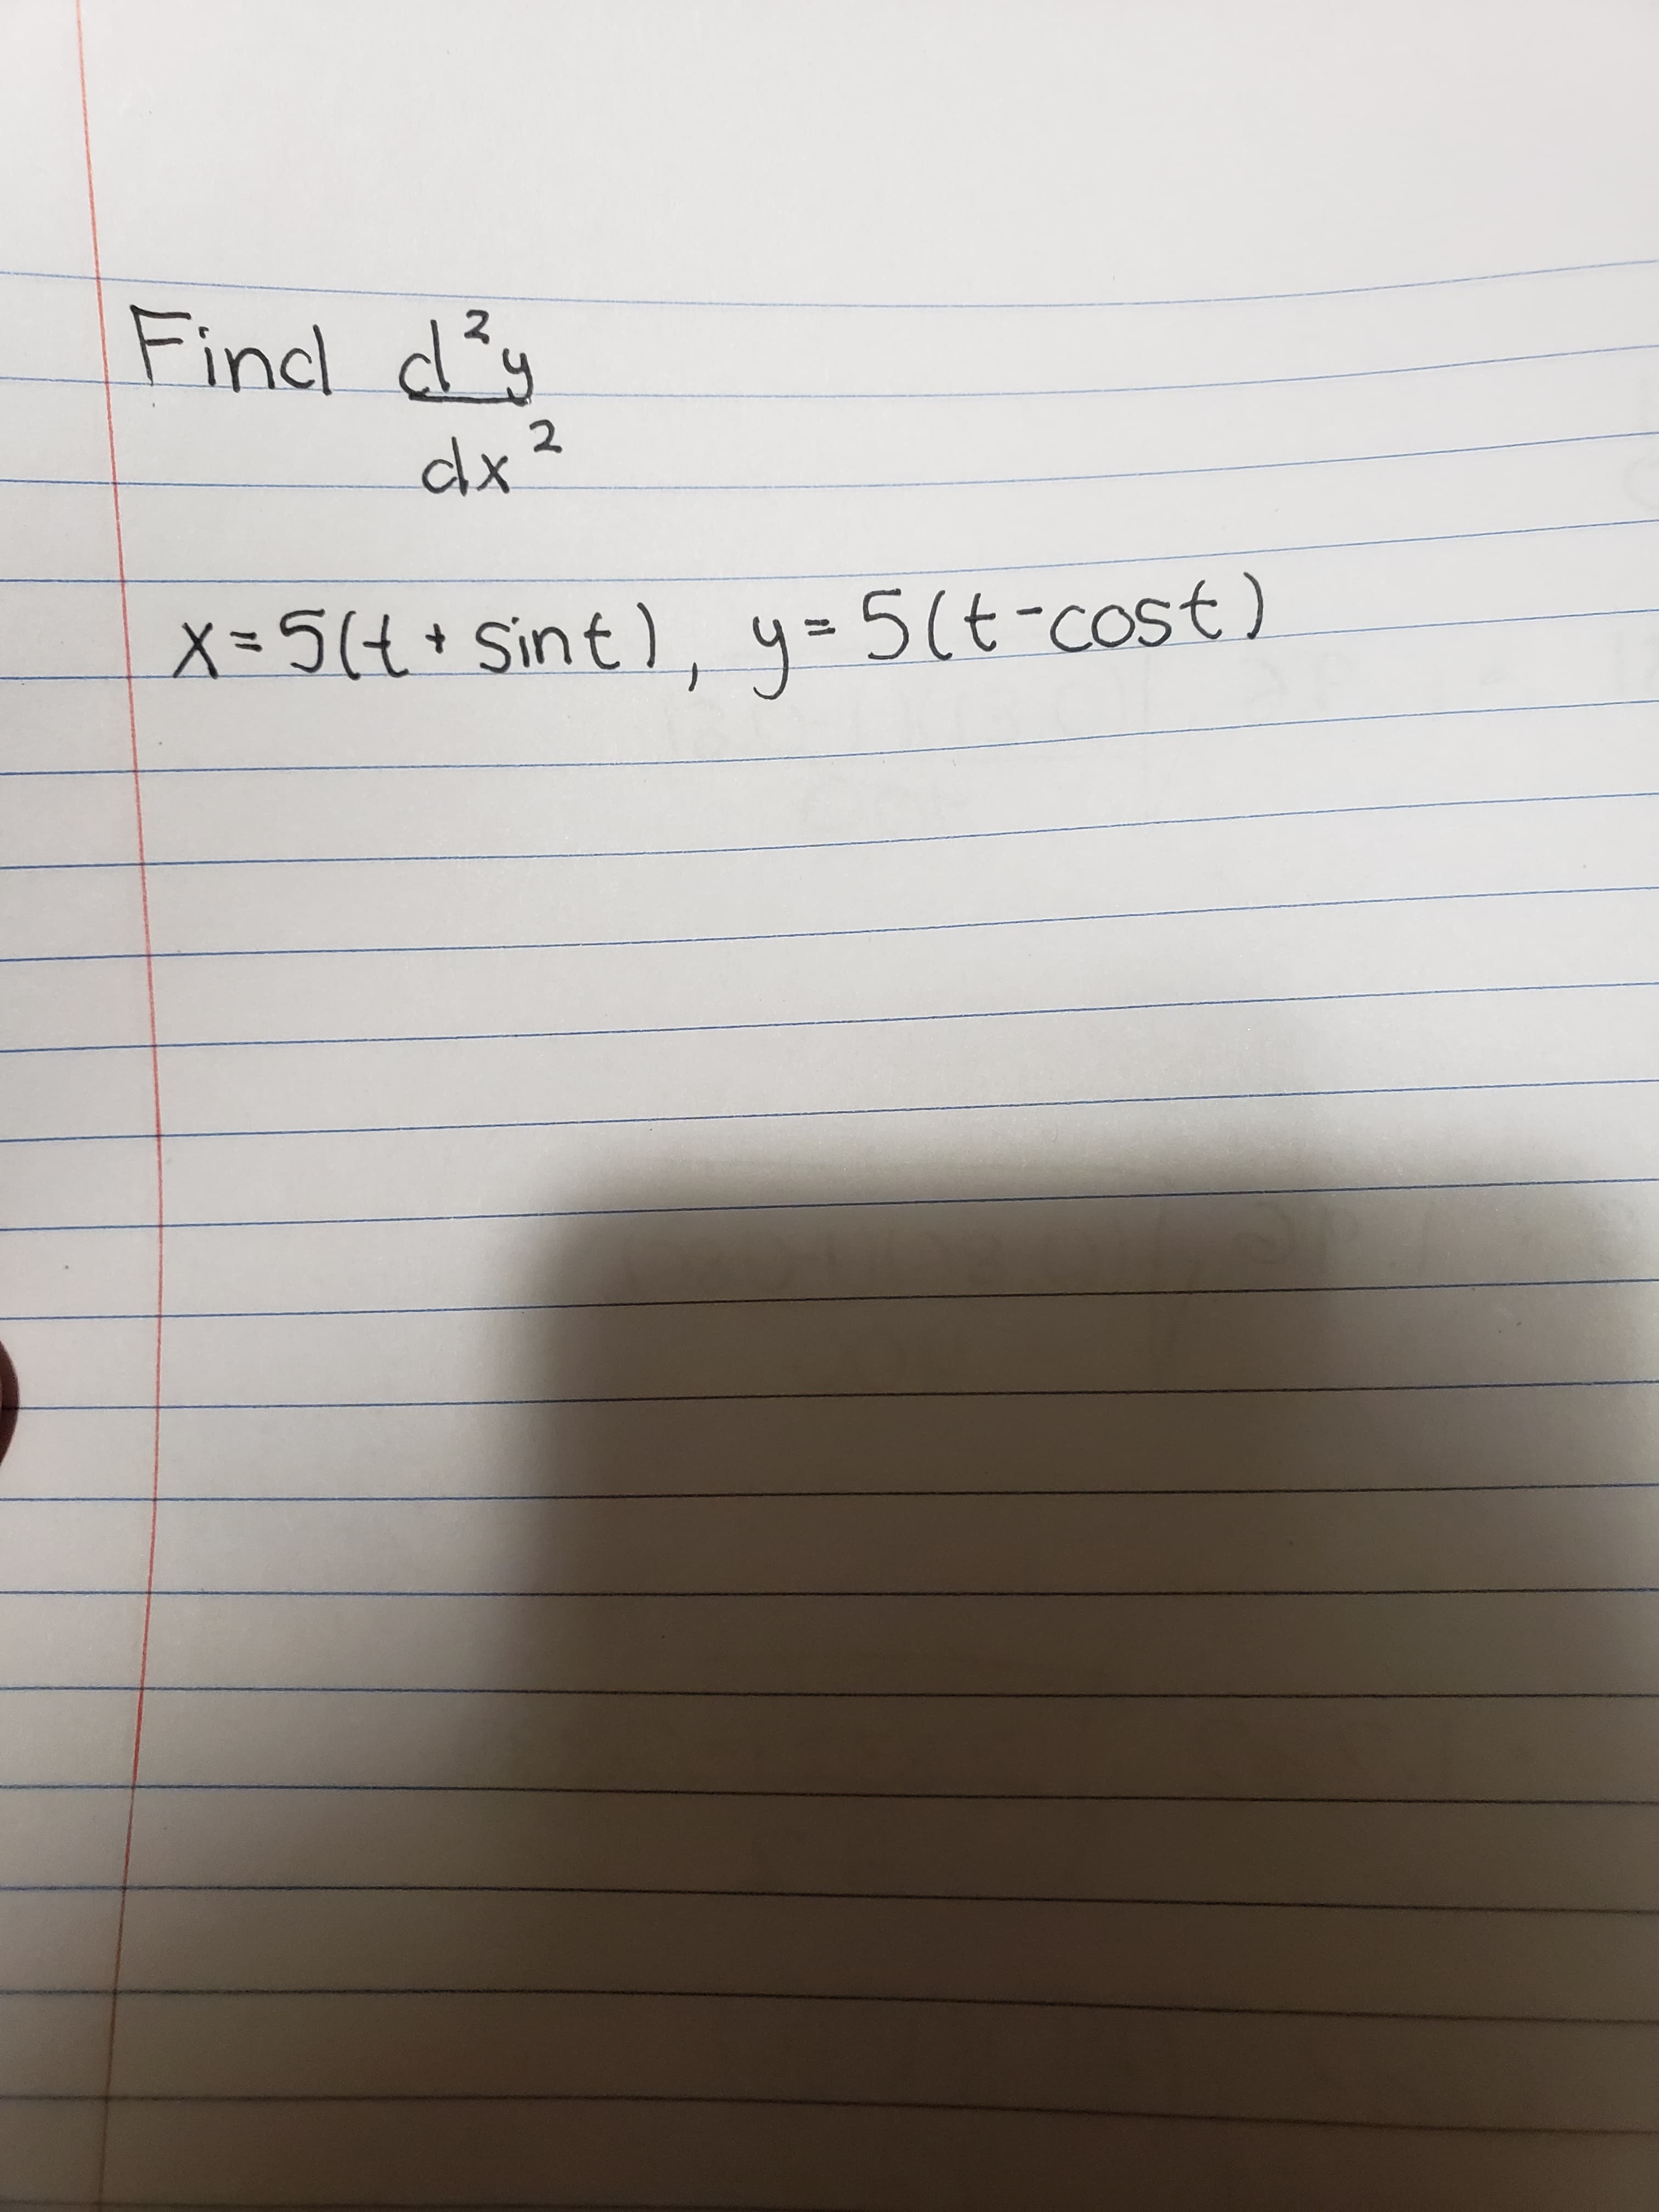 Findl d²y
dx²
X=5(t+ Sint), y=
5(t-Cost)
